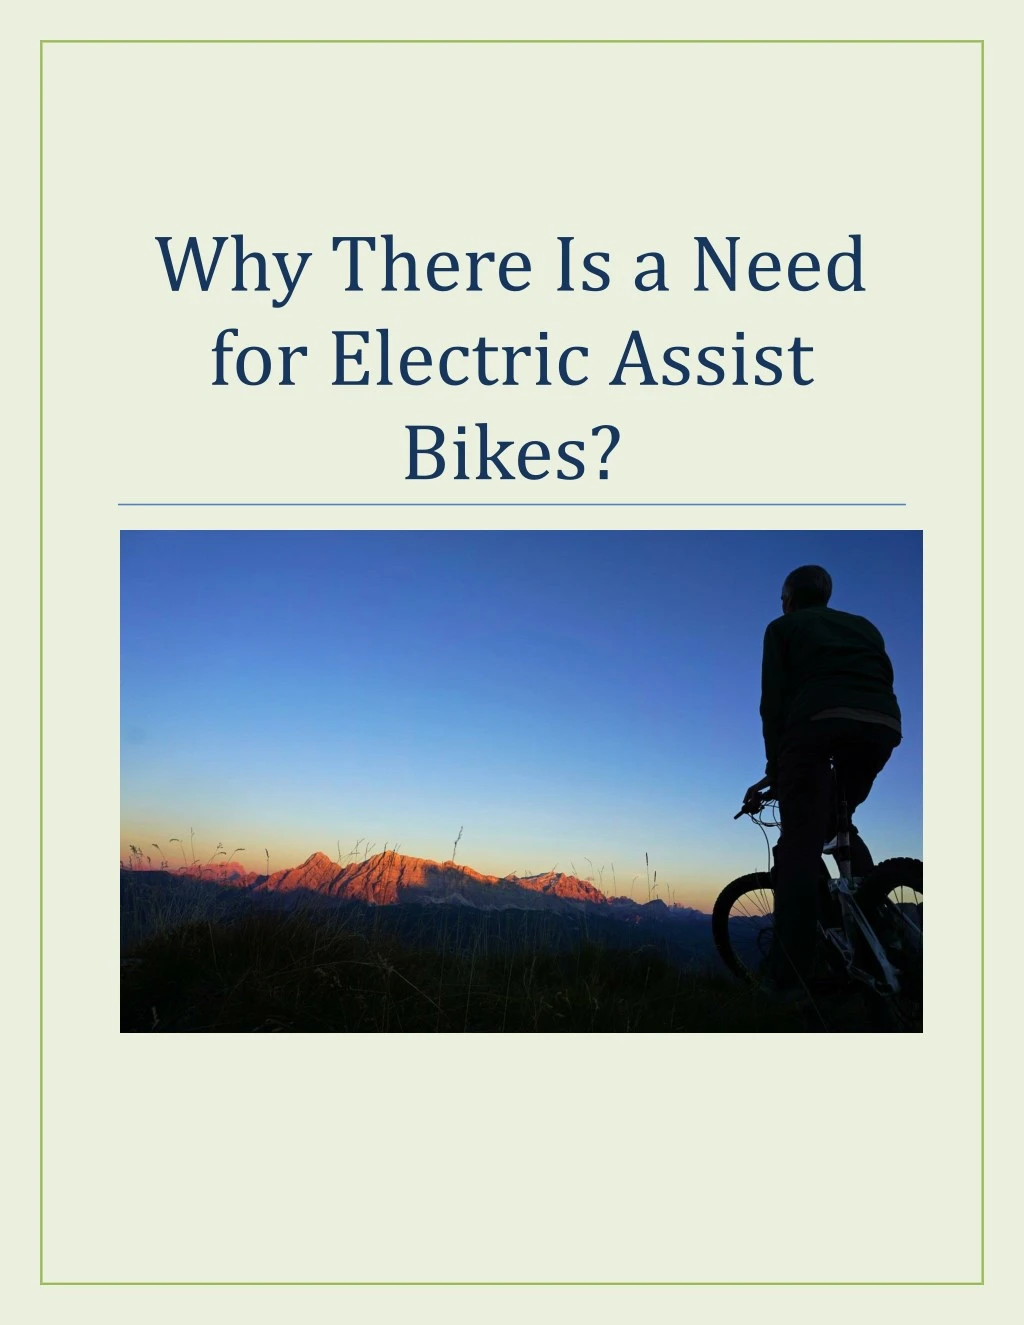 why there is a need for electric assist bikes